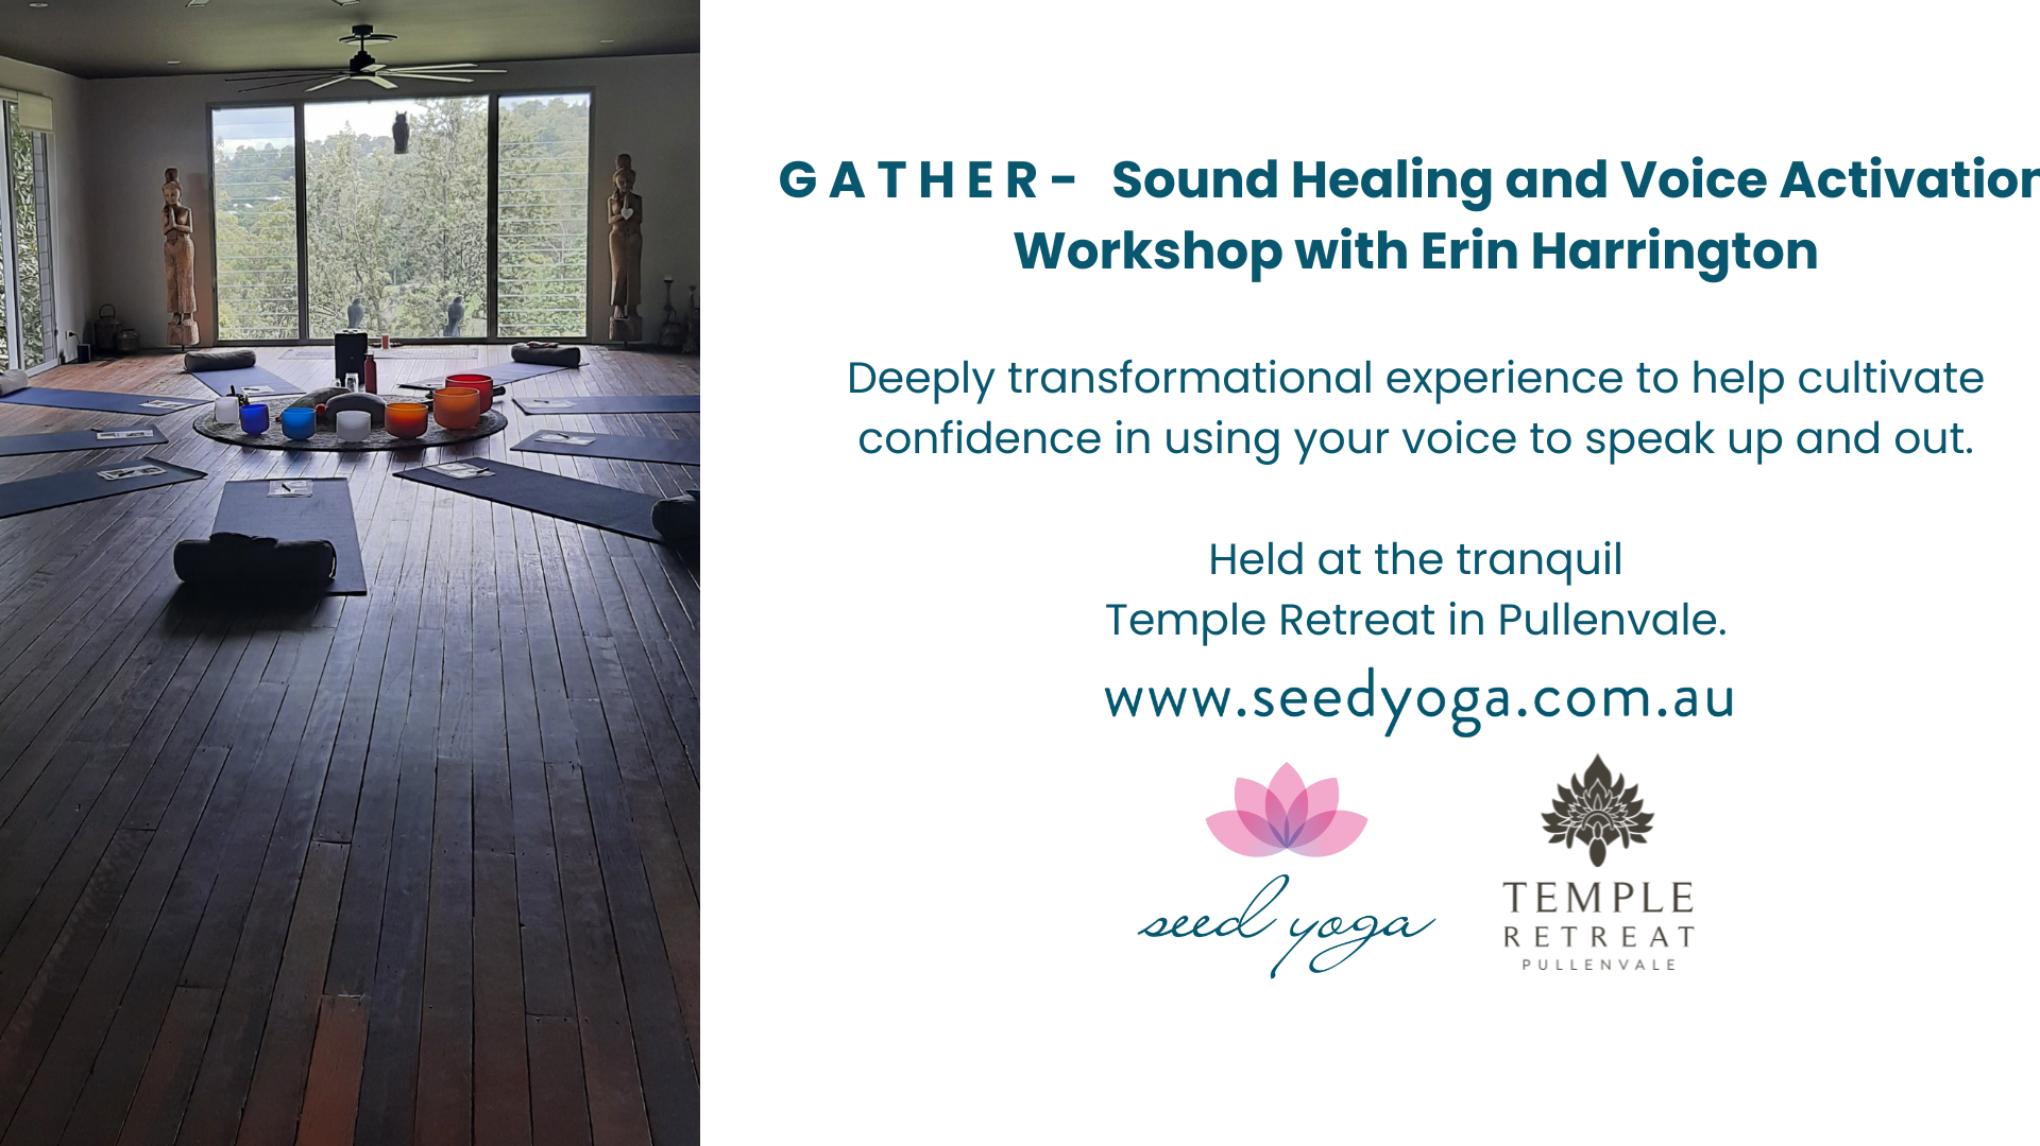 Gather - Sound Healing and Voice Activation Workshop with Erin Harrington